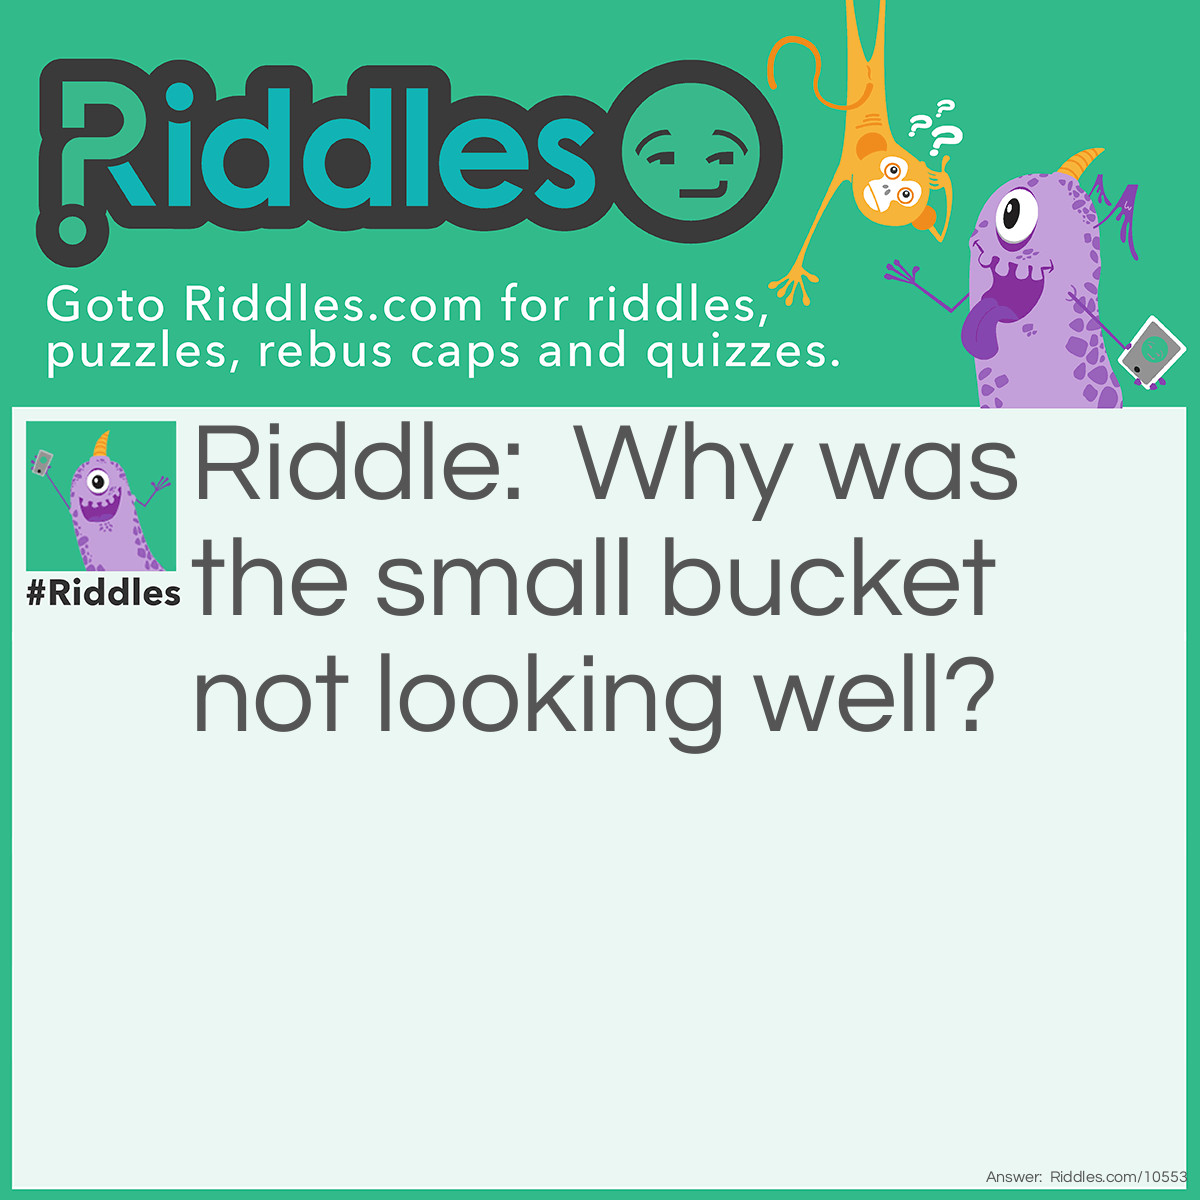 Riddle: Why was the small bucket not looking well? Answer: Well, he was a little pail (pale).